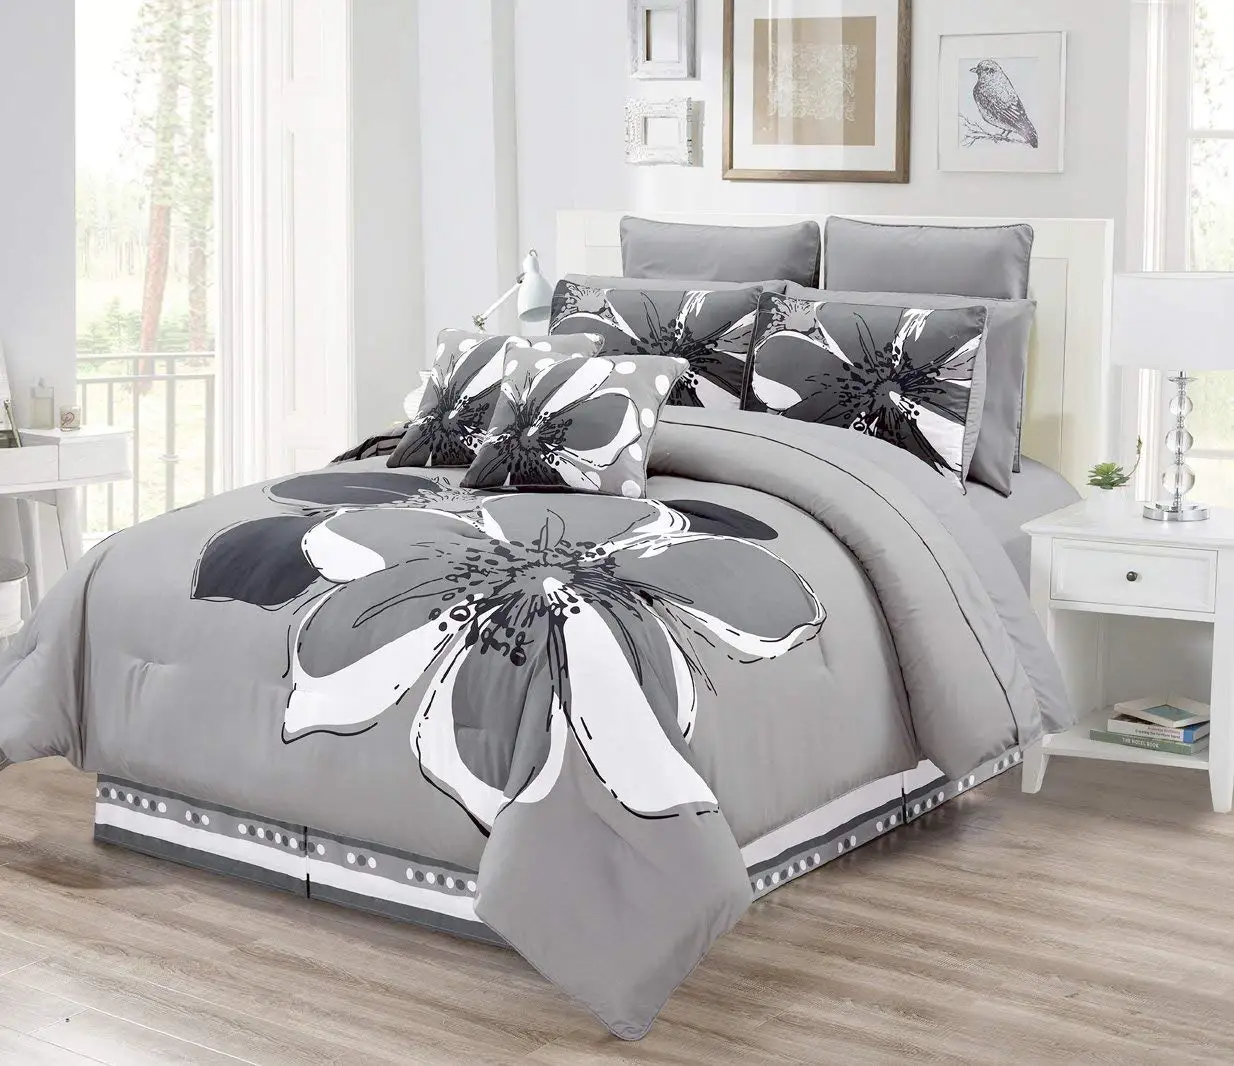 Comforter sets are designed to keep you updated and fashionable in the most...